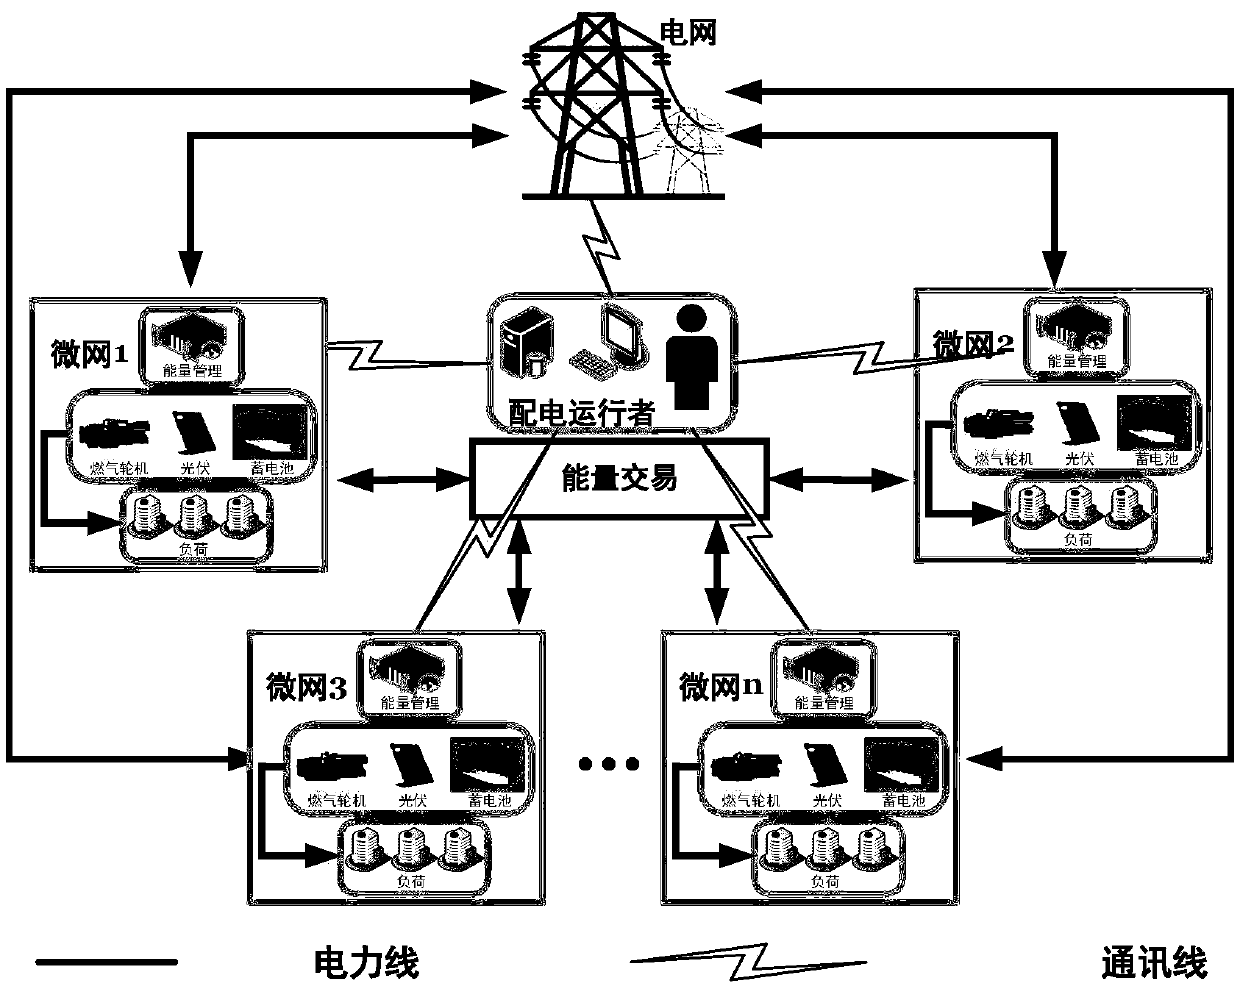 A method and system for avoiding risk transactions of an interconnected energy system